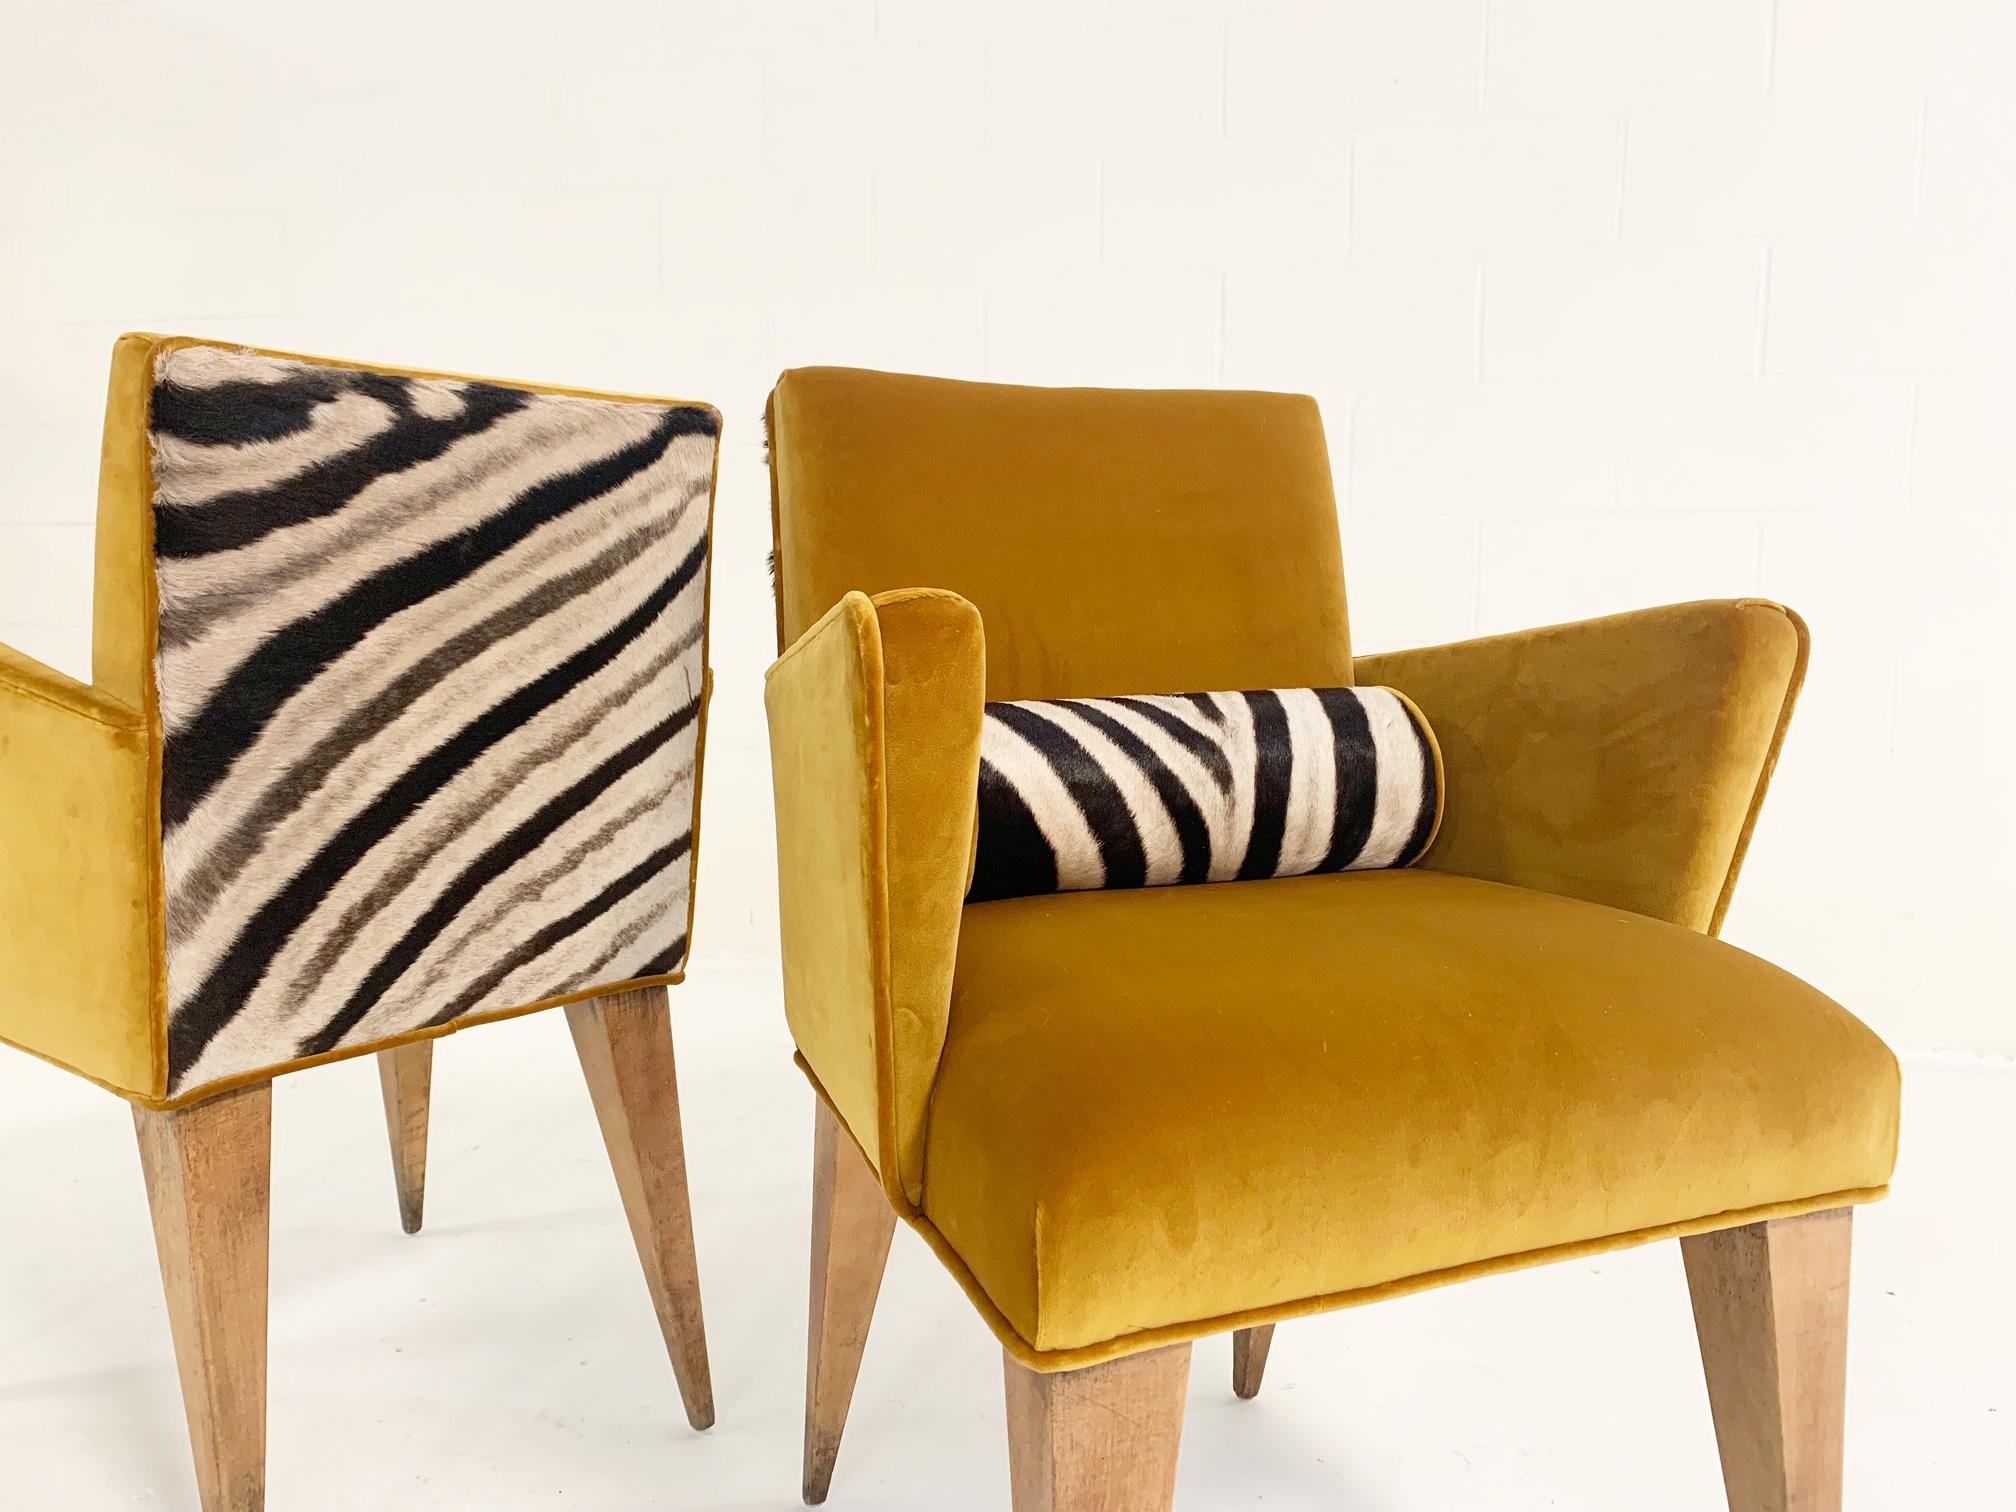 Mexican Modernist Chairs in Loro Piana Velvet and Zebra Hide, Pair 8